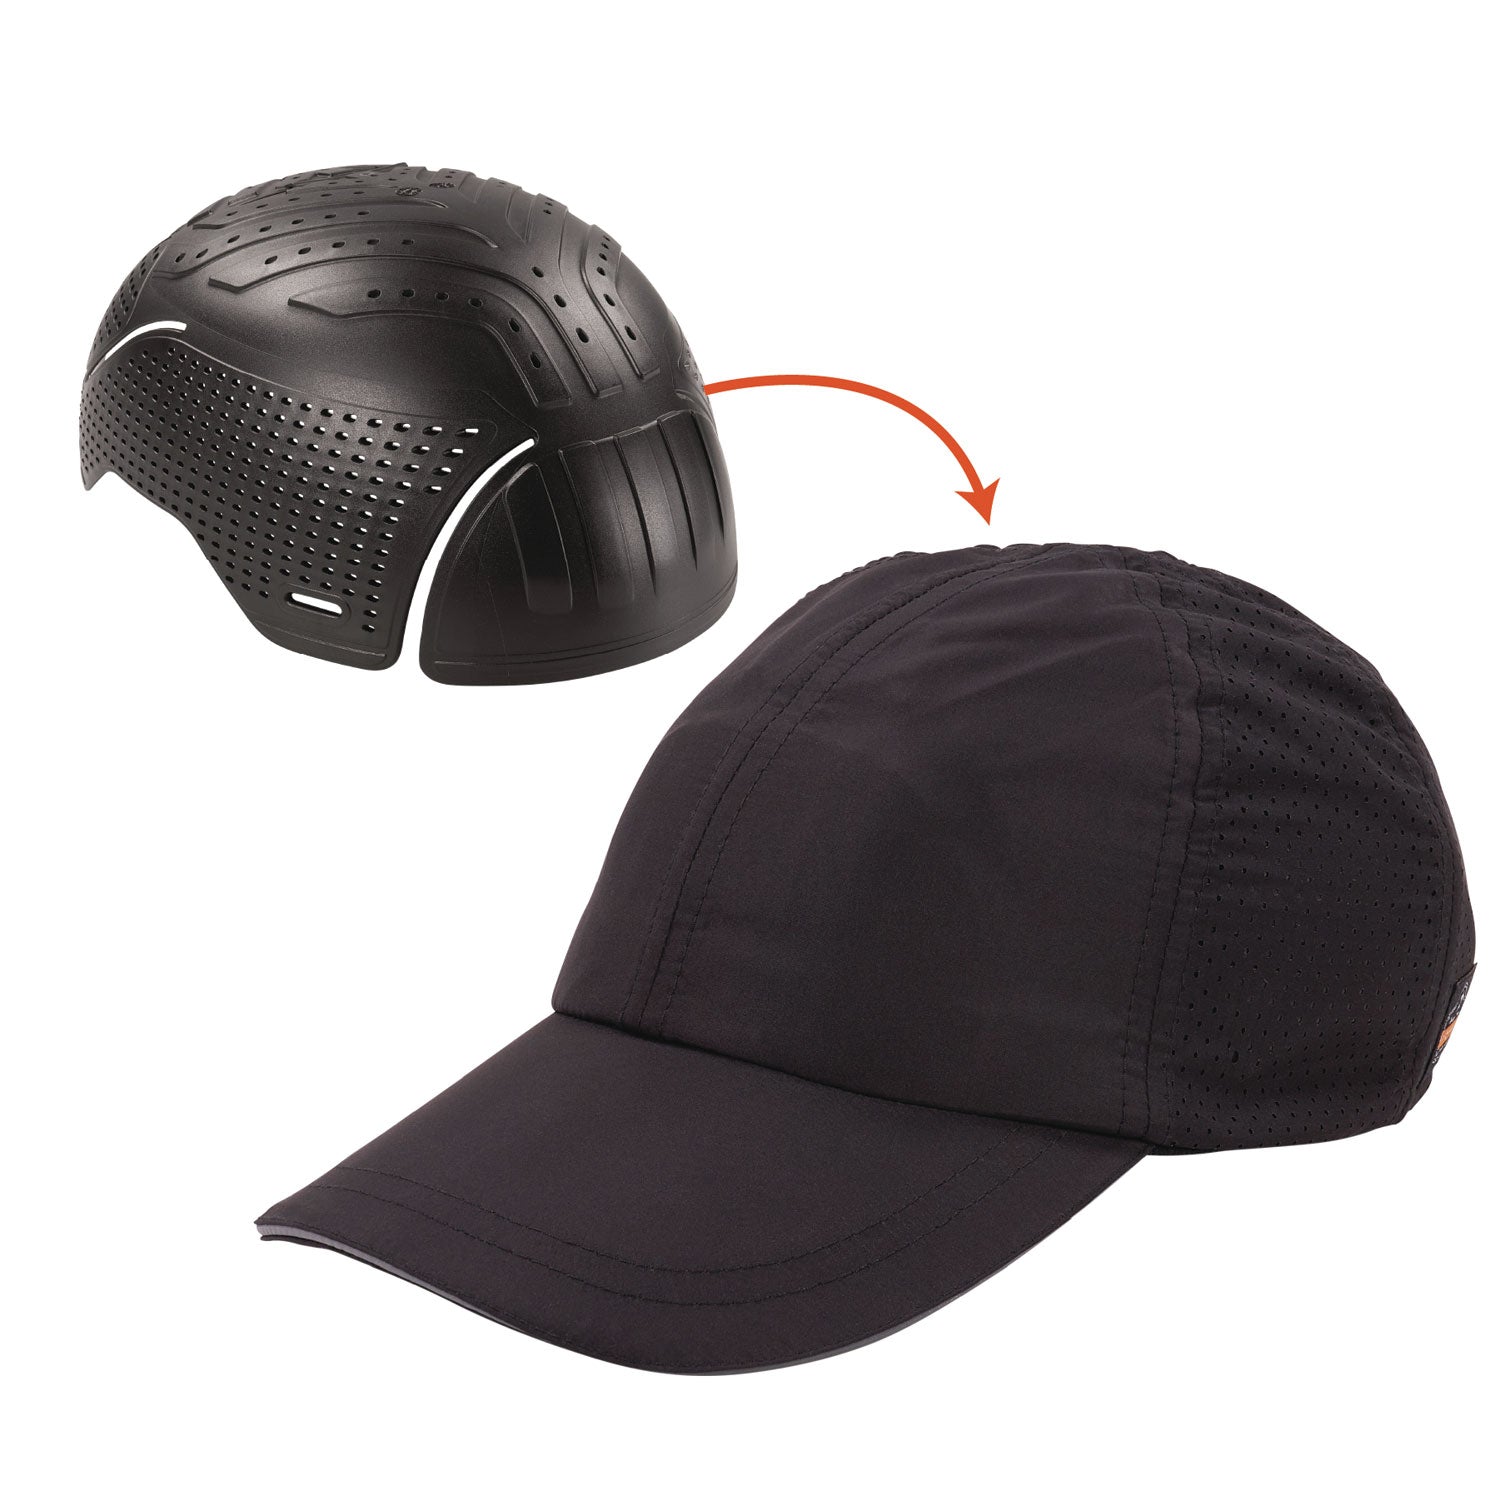 skullerz-8947-lightweight-baseball-hat-and-bump-cap-insert-x-large-2x-large-black-ships-in-1-3-business-days_ego23452 - 1